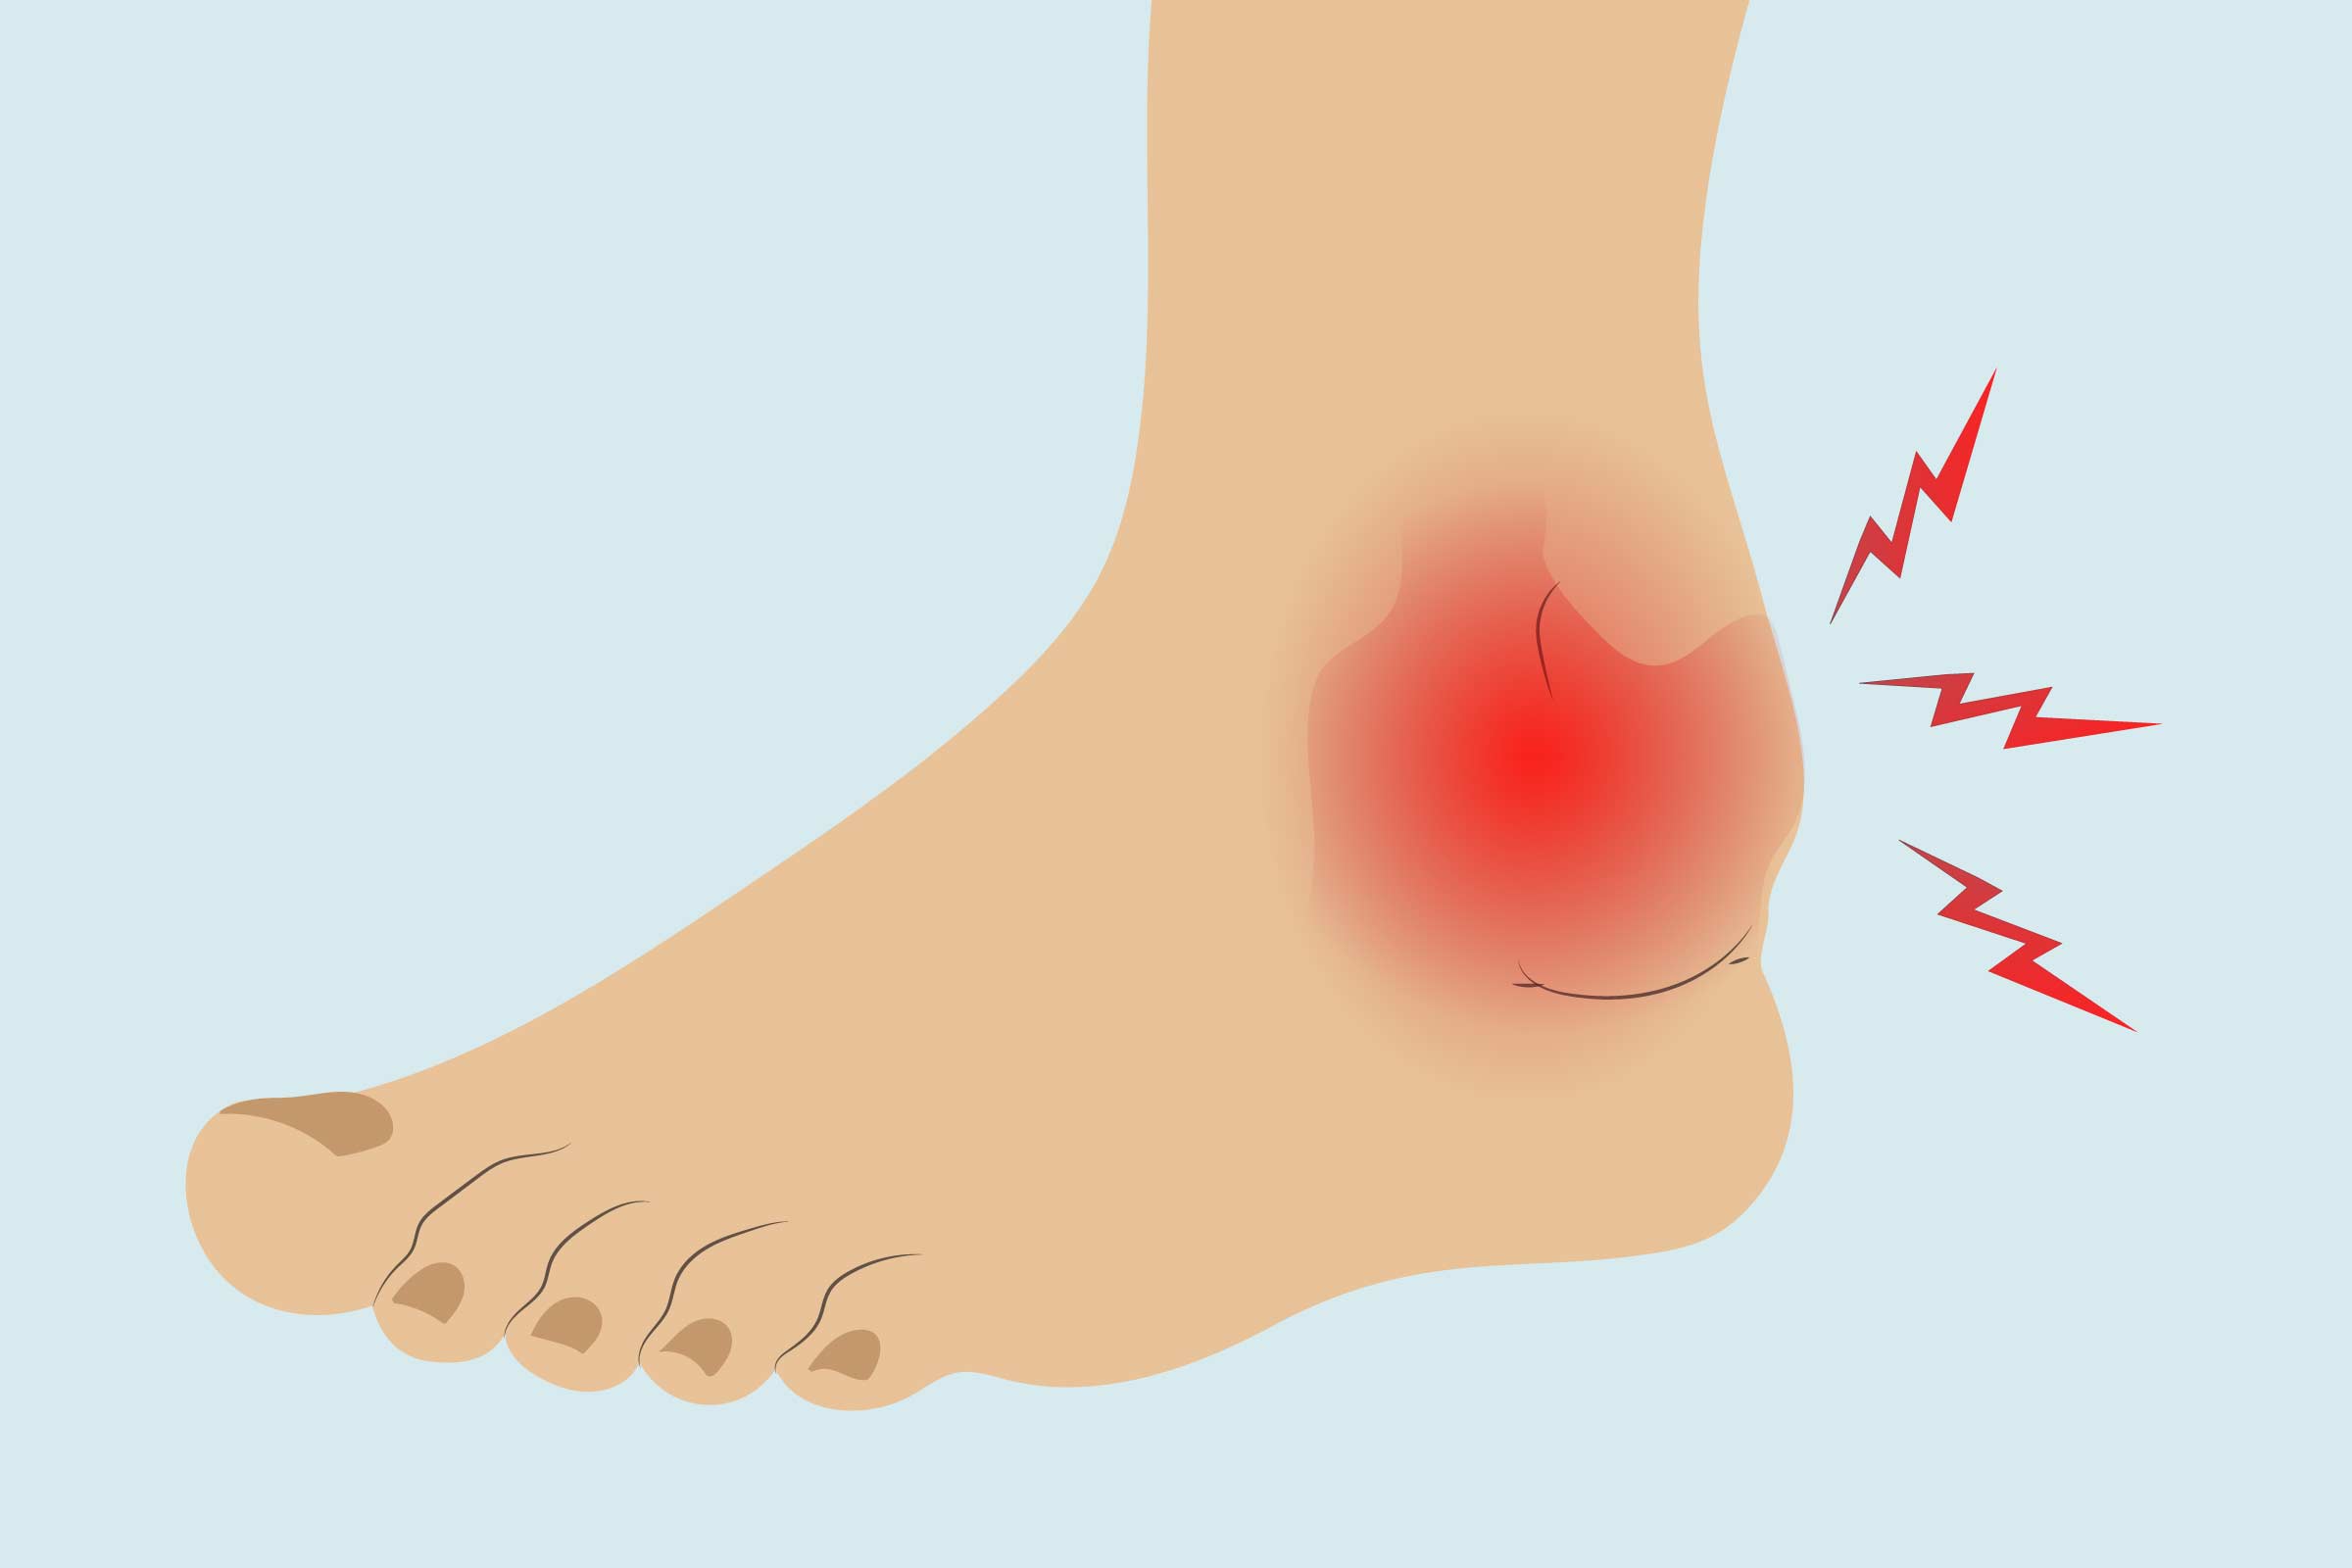 Broken Ankle Symptoms, Causes, Pictures, Treatments, and Rehab